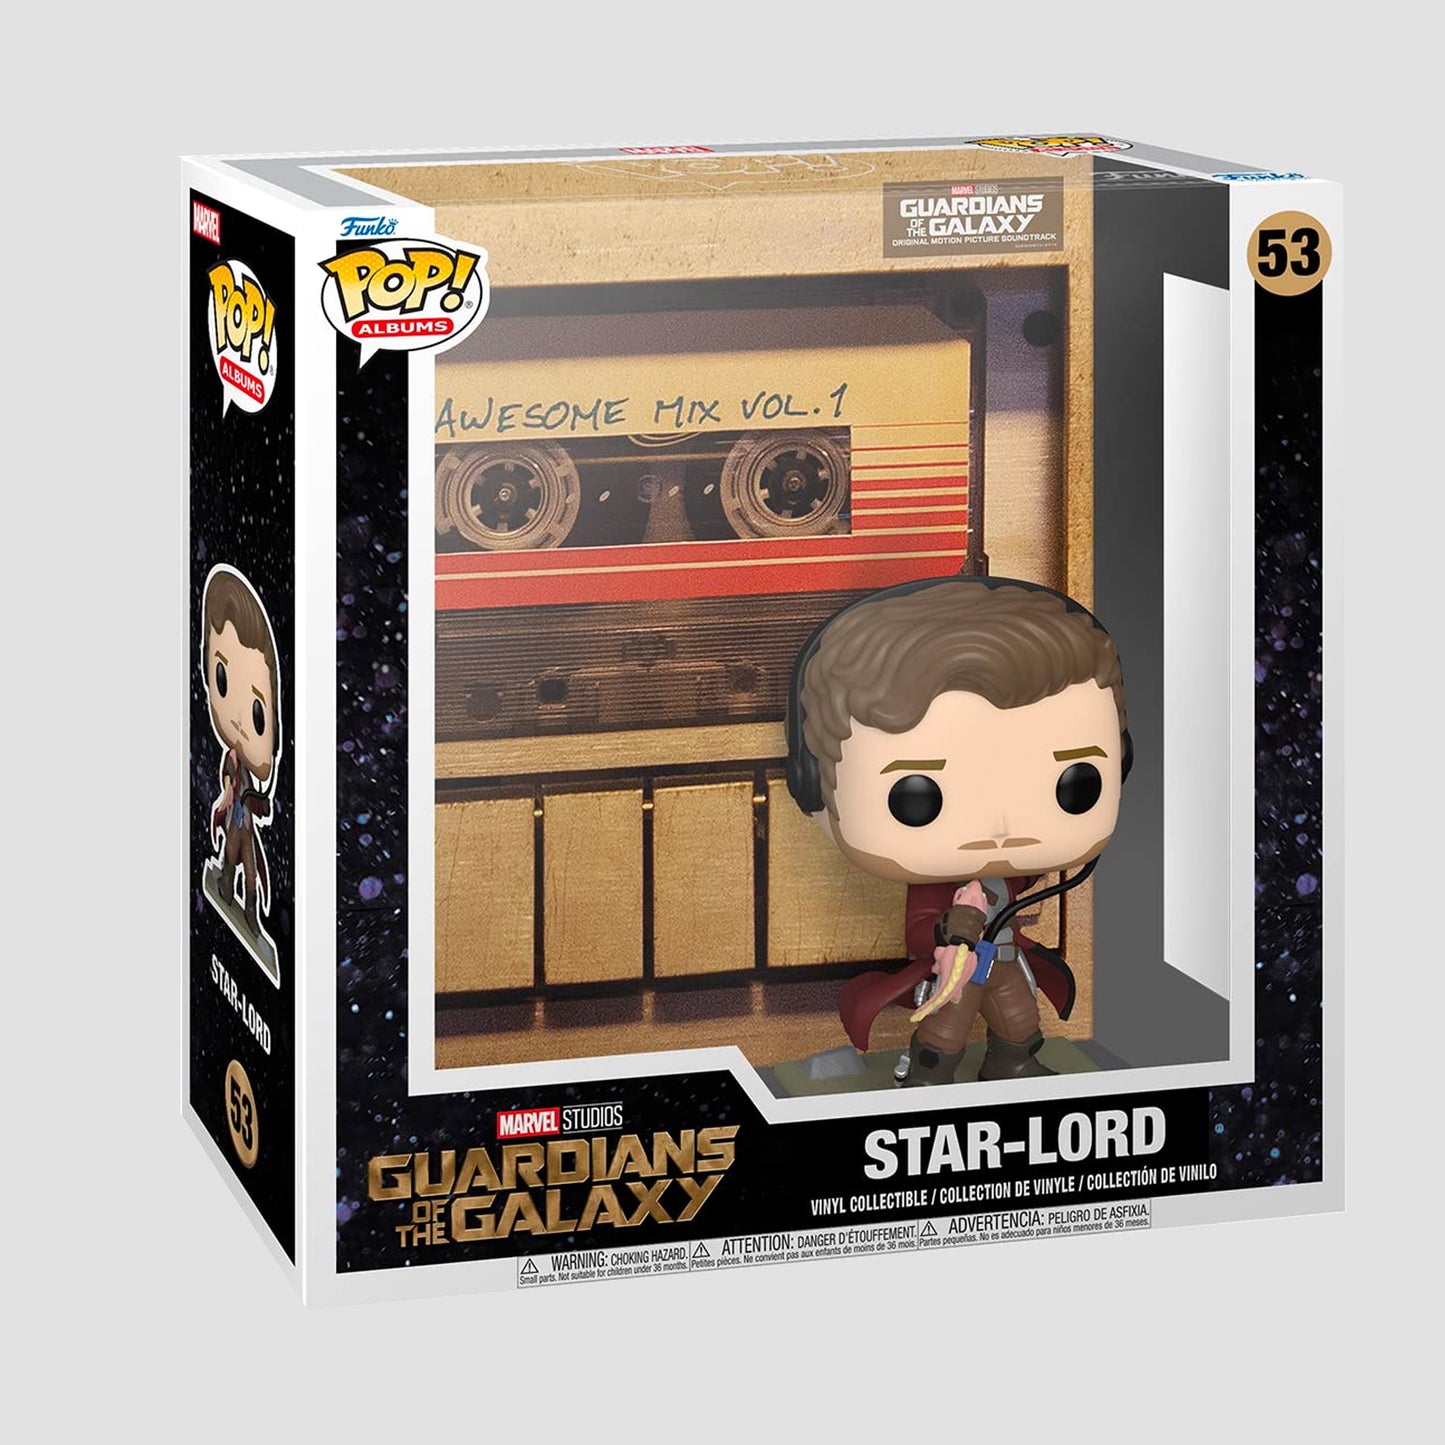 Star-Lord (Guardians of the Galaxy) Awesome Mix Vol. 1 Album Funko Pop!